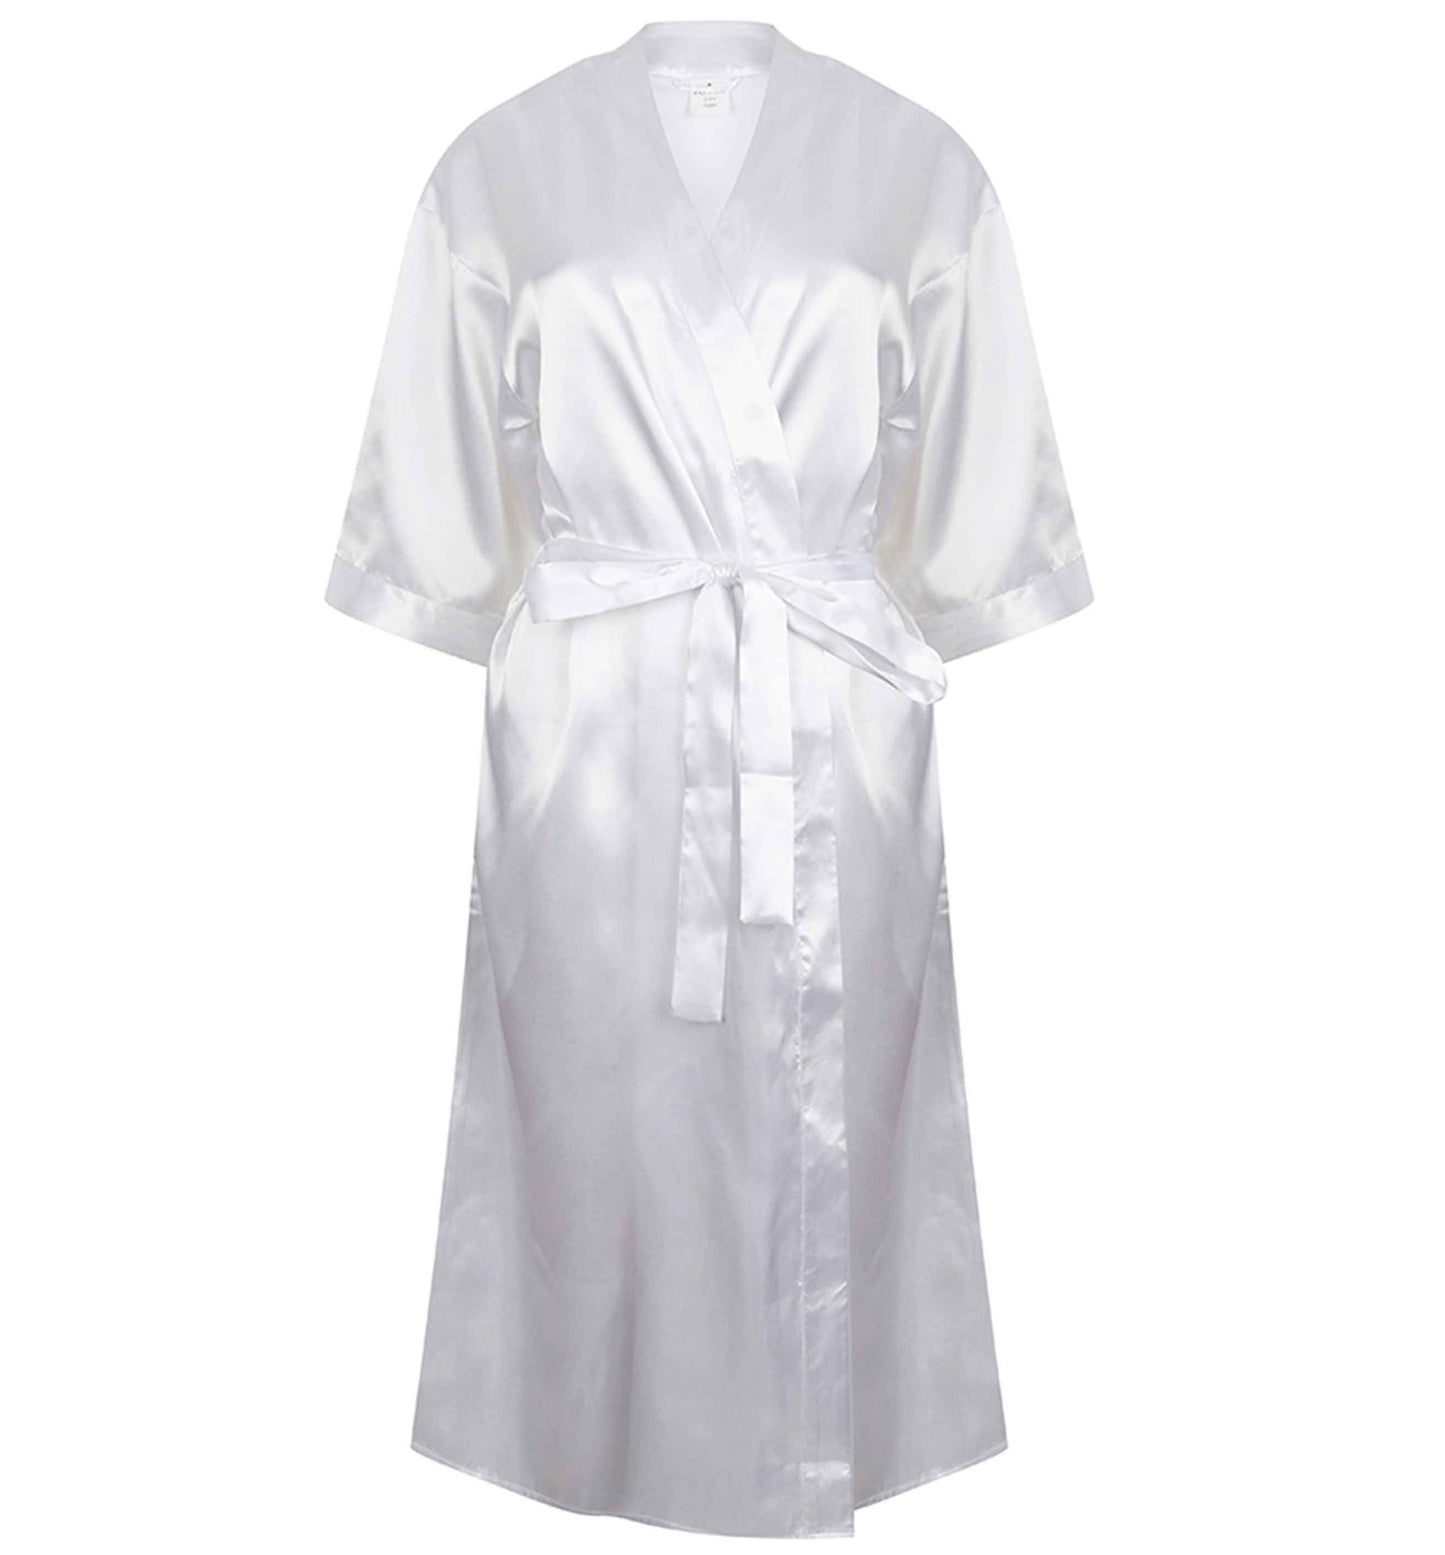 Married at sea pink anchors |  8-18 | Kimono style satin robe | Ladies dressing gown